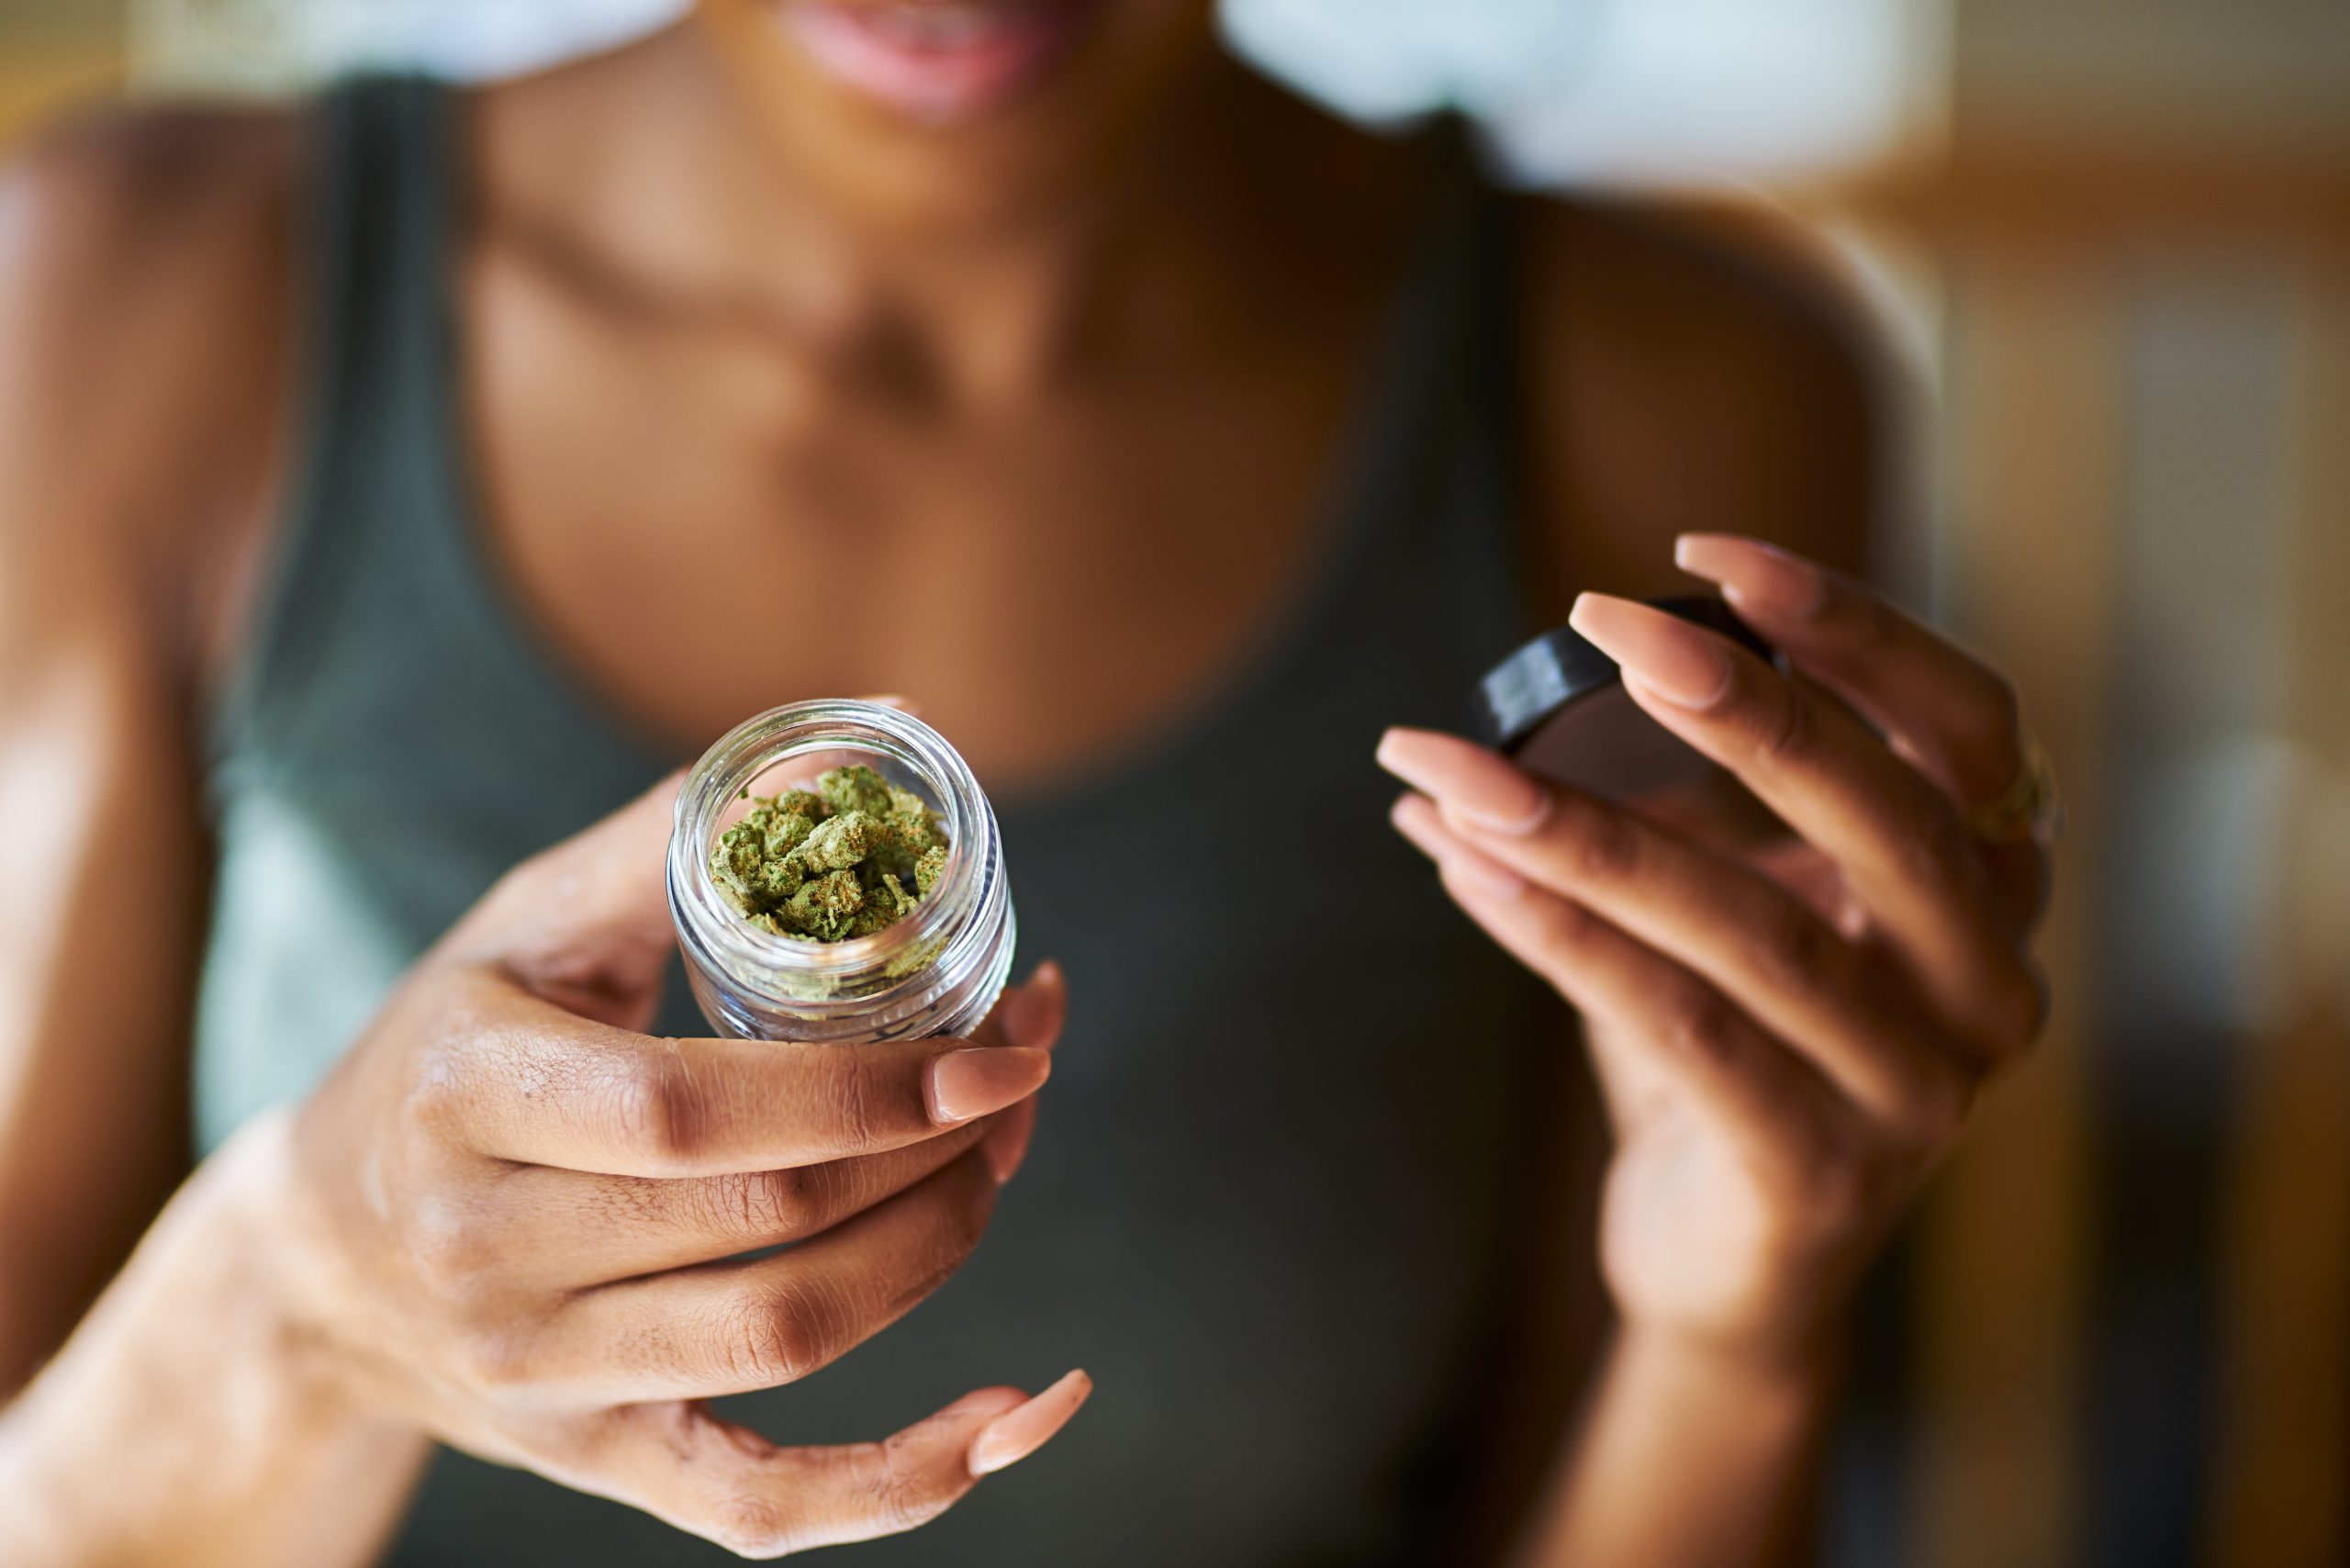 Woman of color holding out a small jar of marijuana buds.